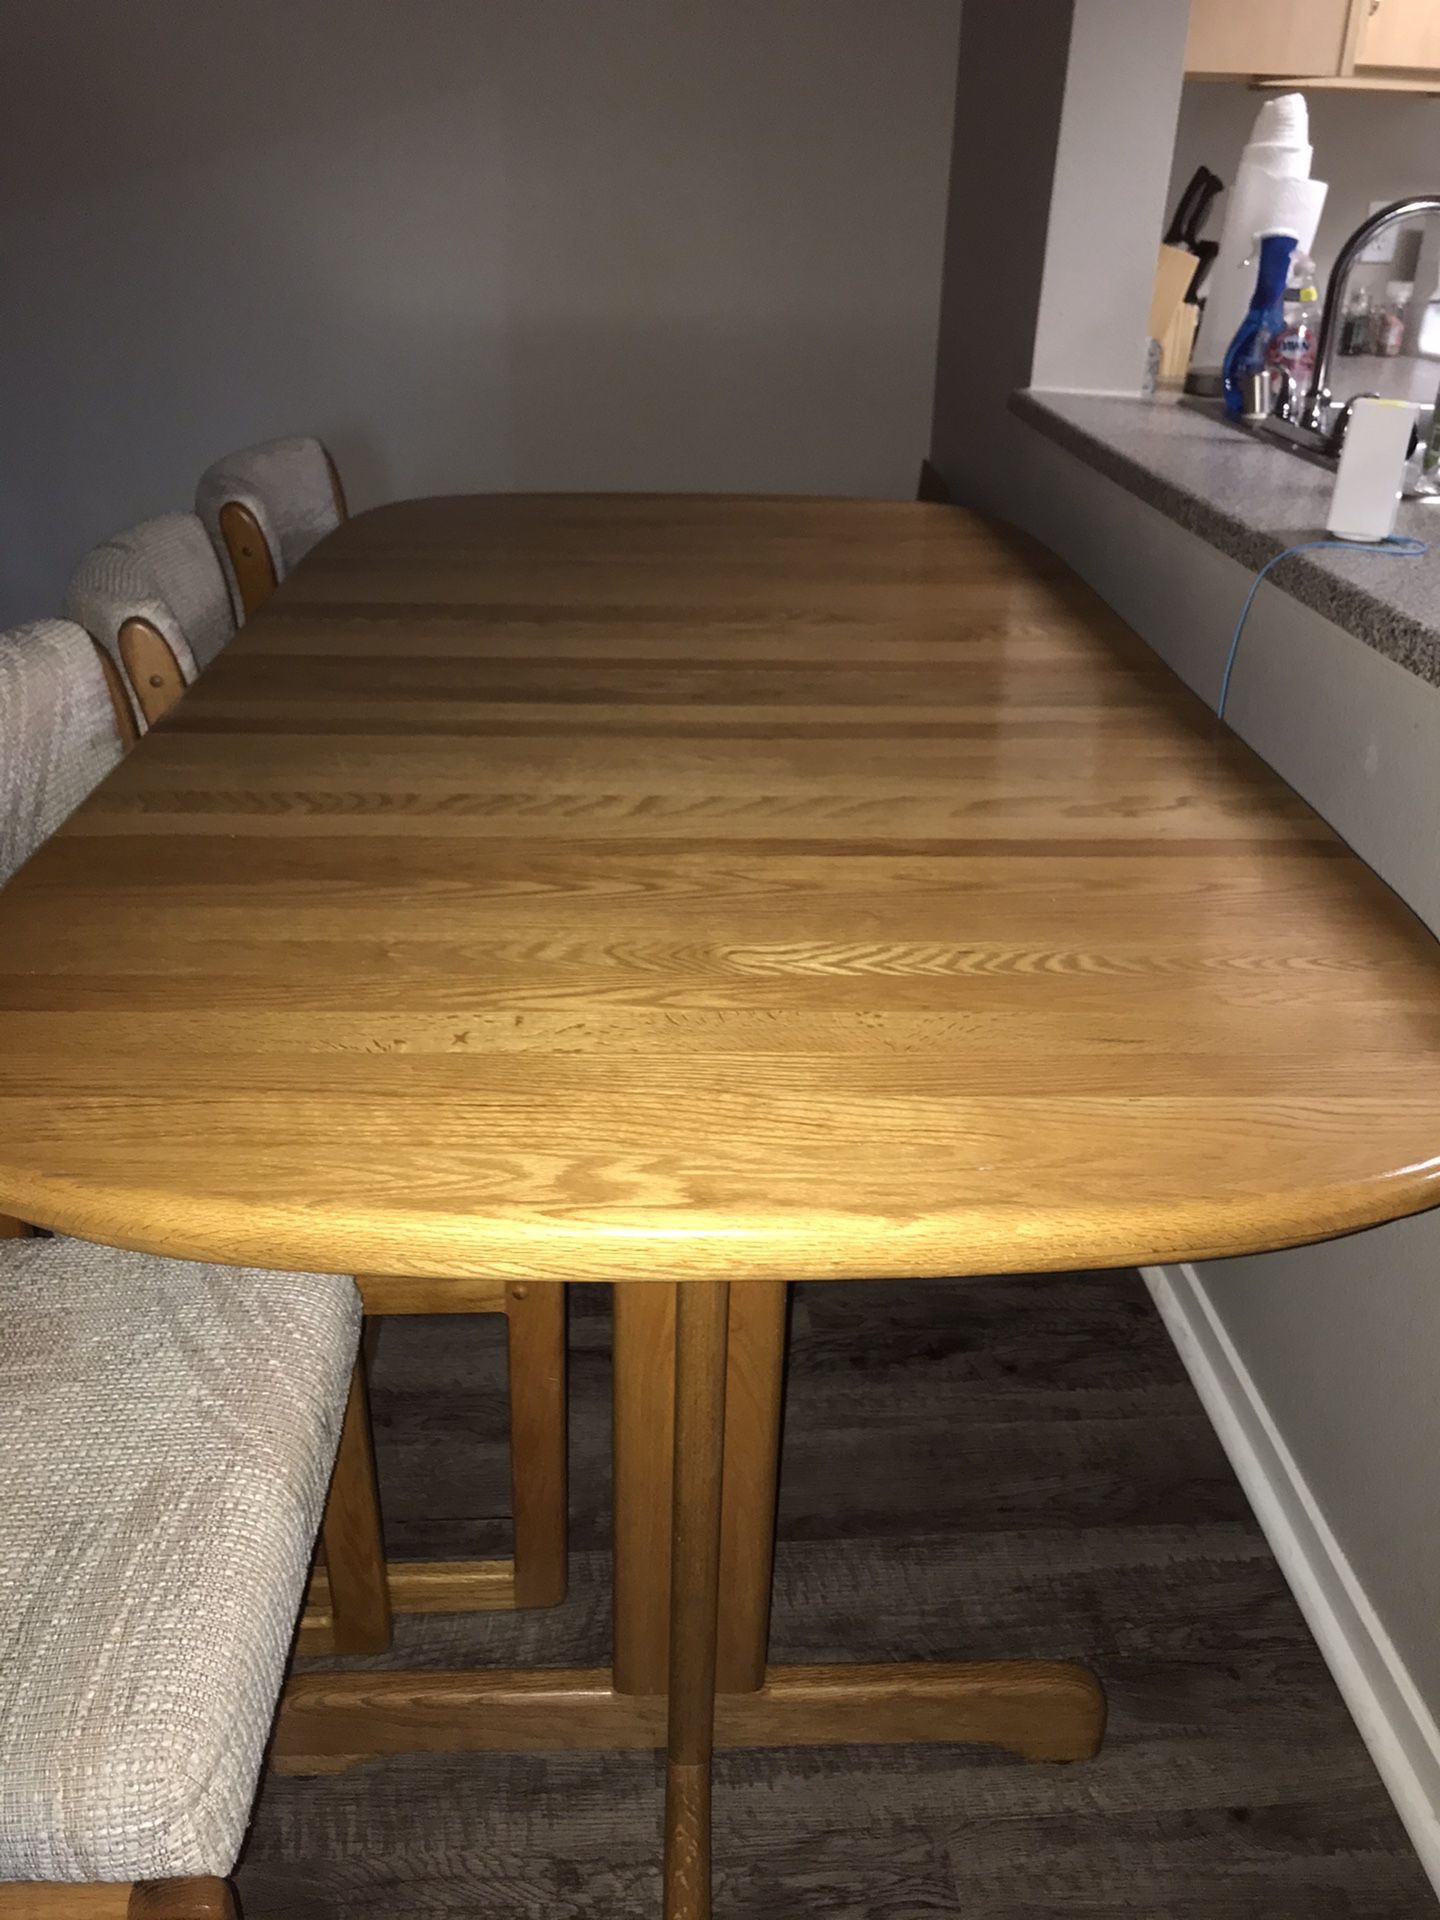 Free dining room table and 4 chairs!!